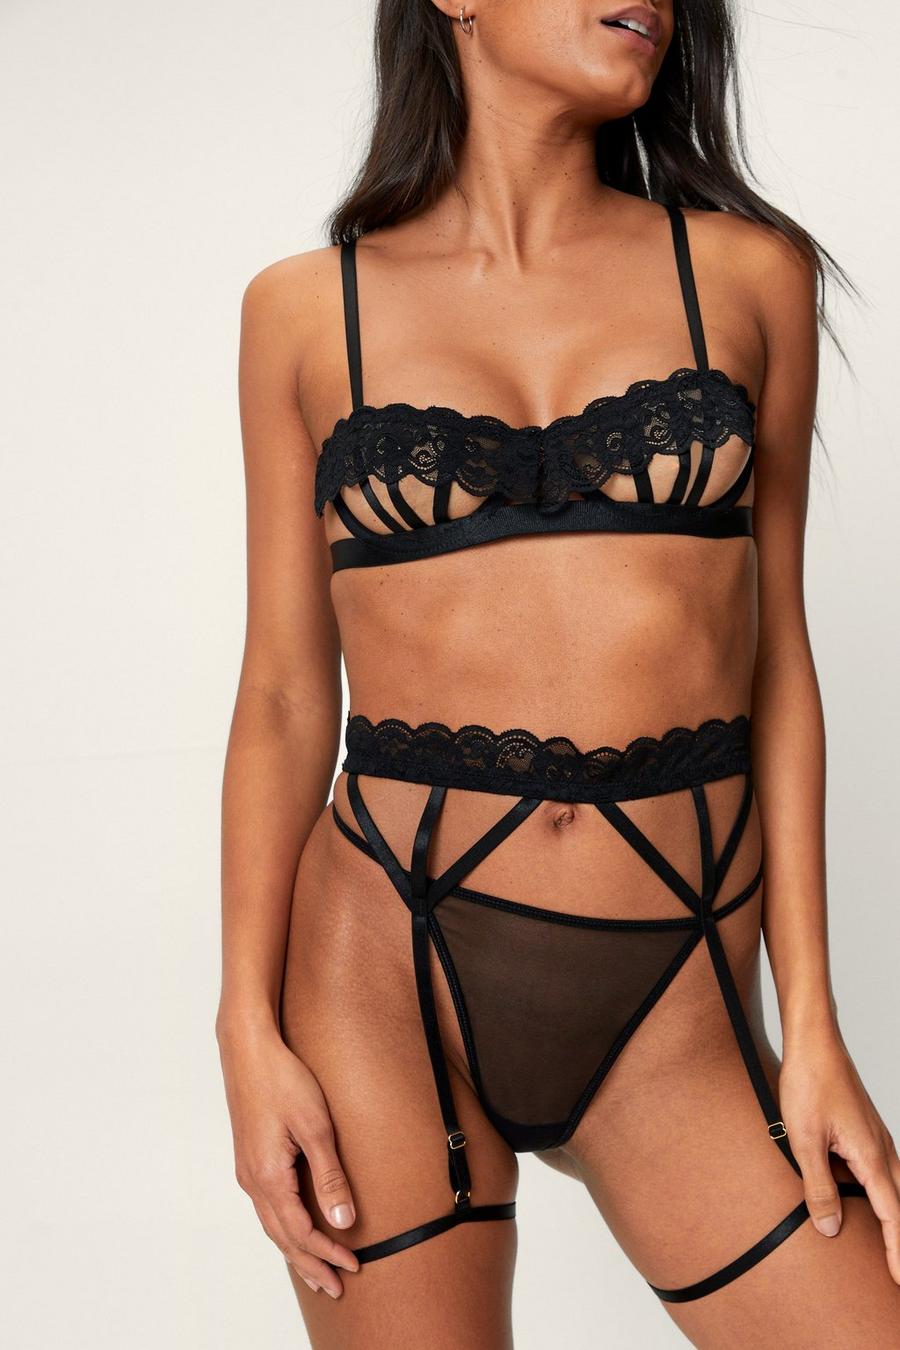 Caged Ruffle Harness Underwired 3pc Lingerie Set